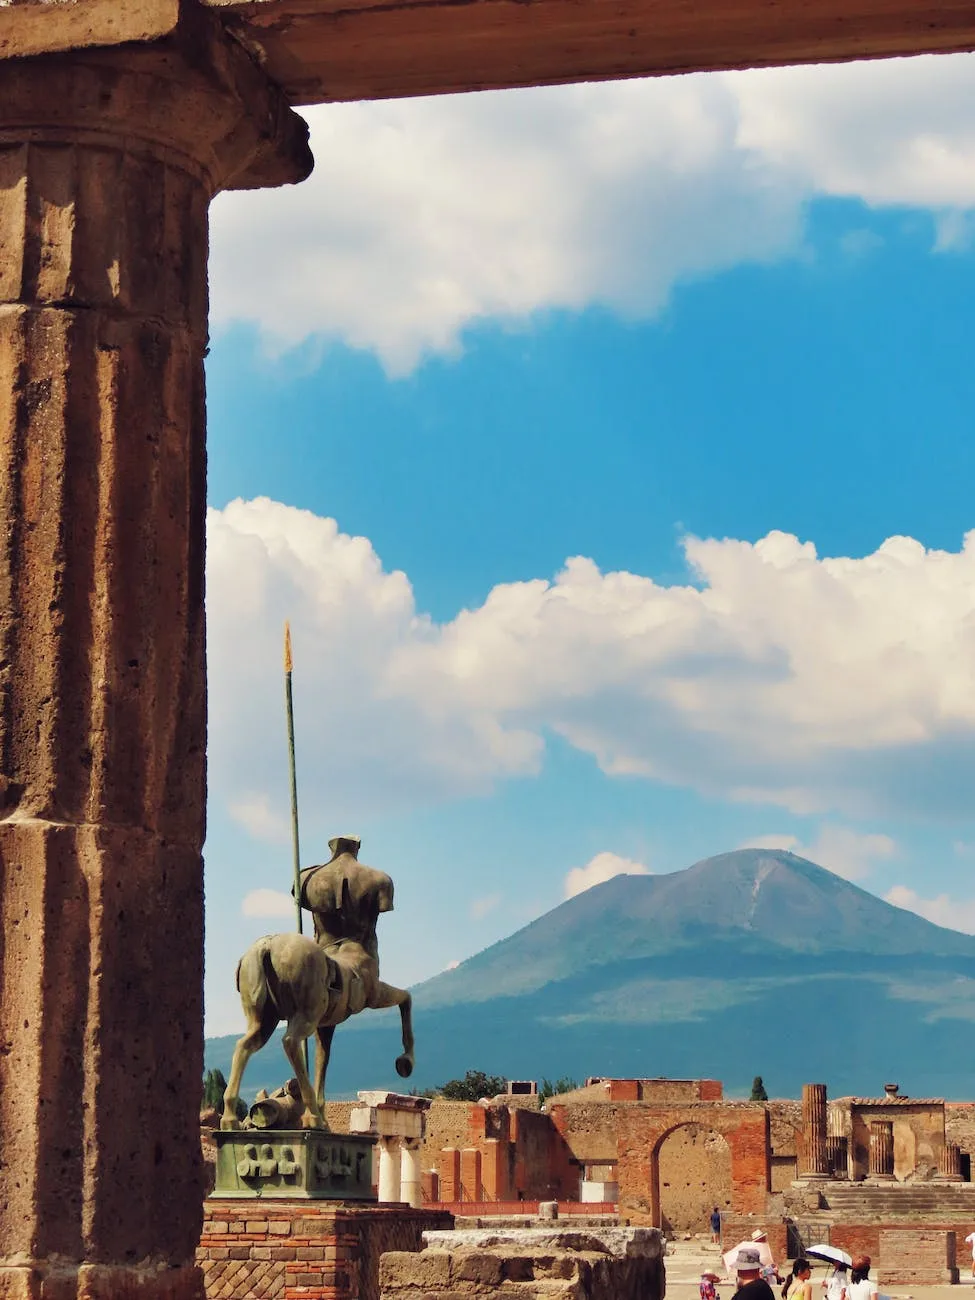 a statue of a horse and rider in front of a mountain in Pompeii